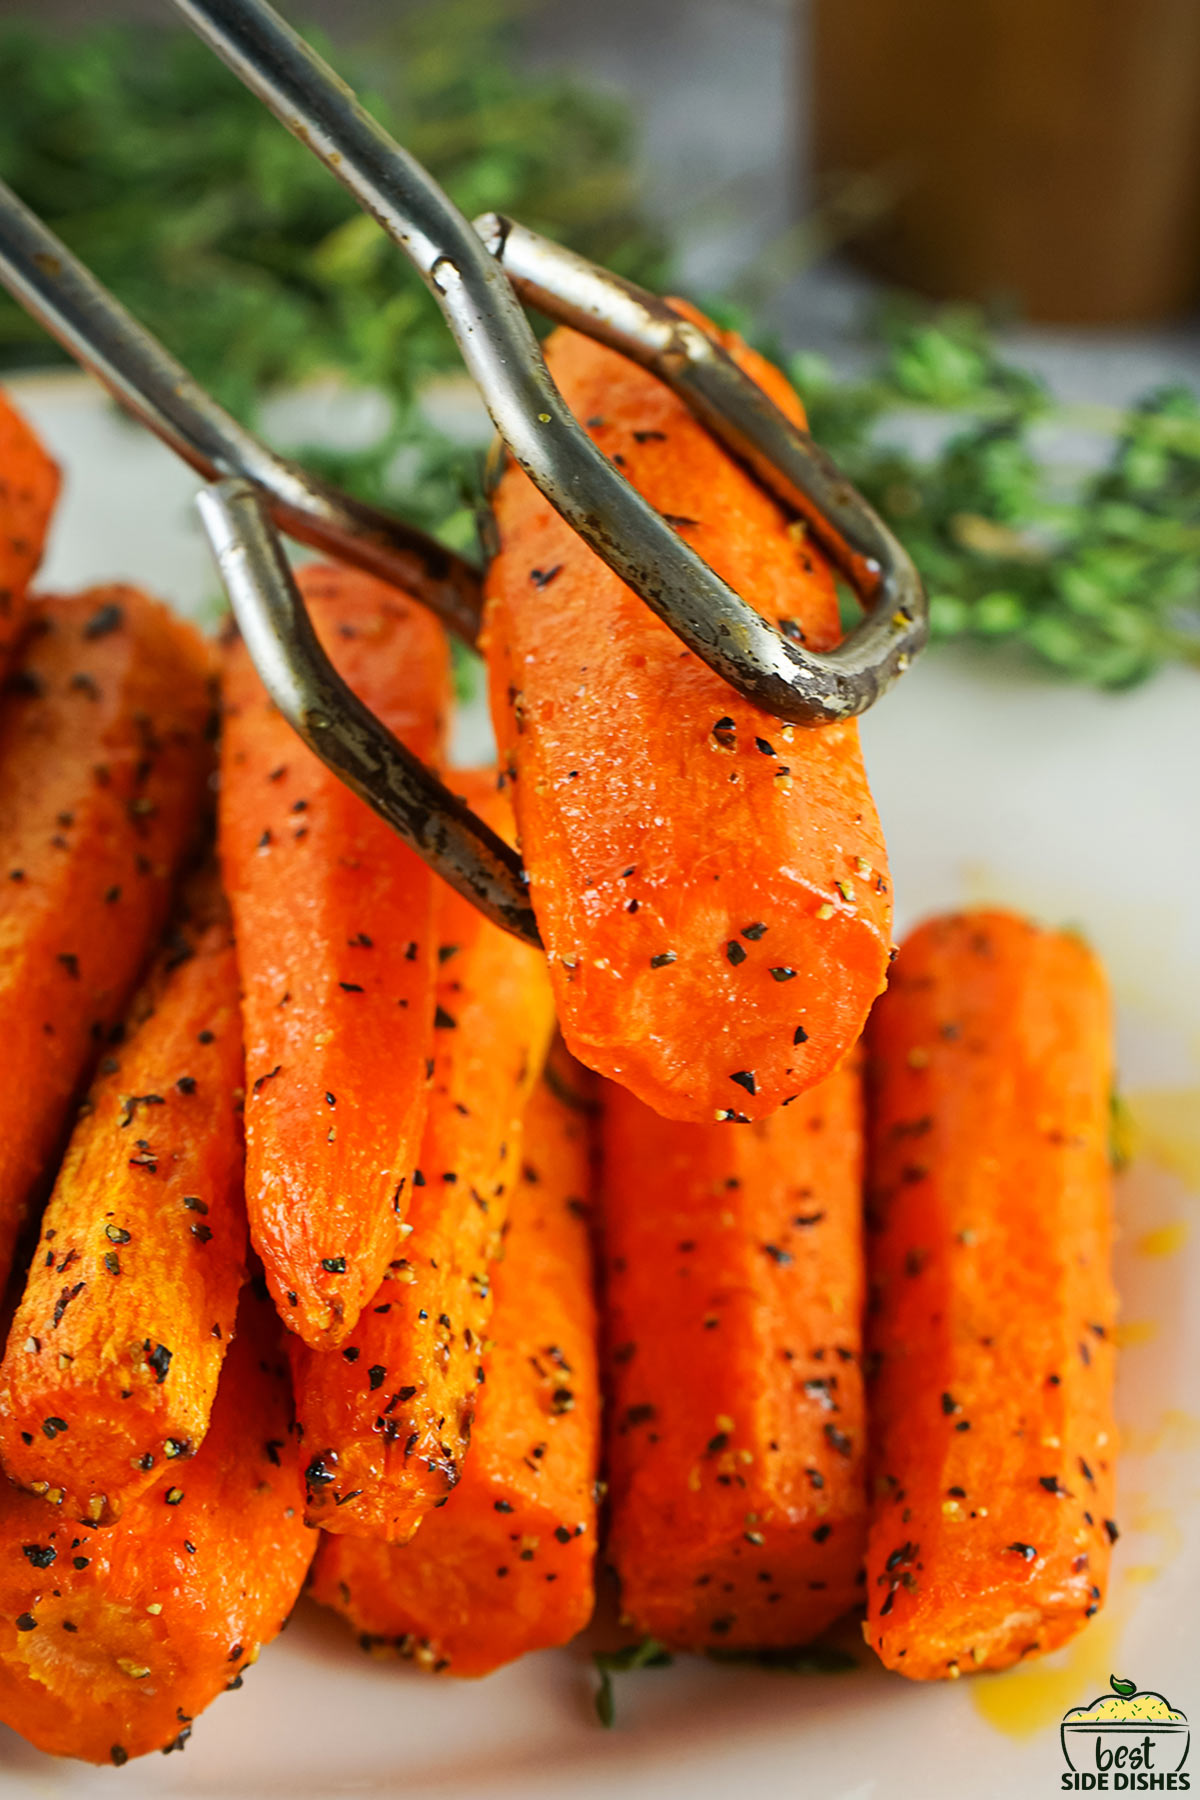 metal tongs holding up a fully cooked air fryer carrot over a plate of carrots